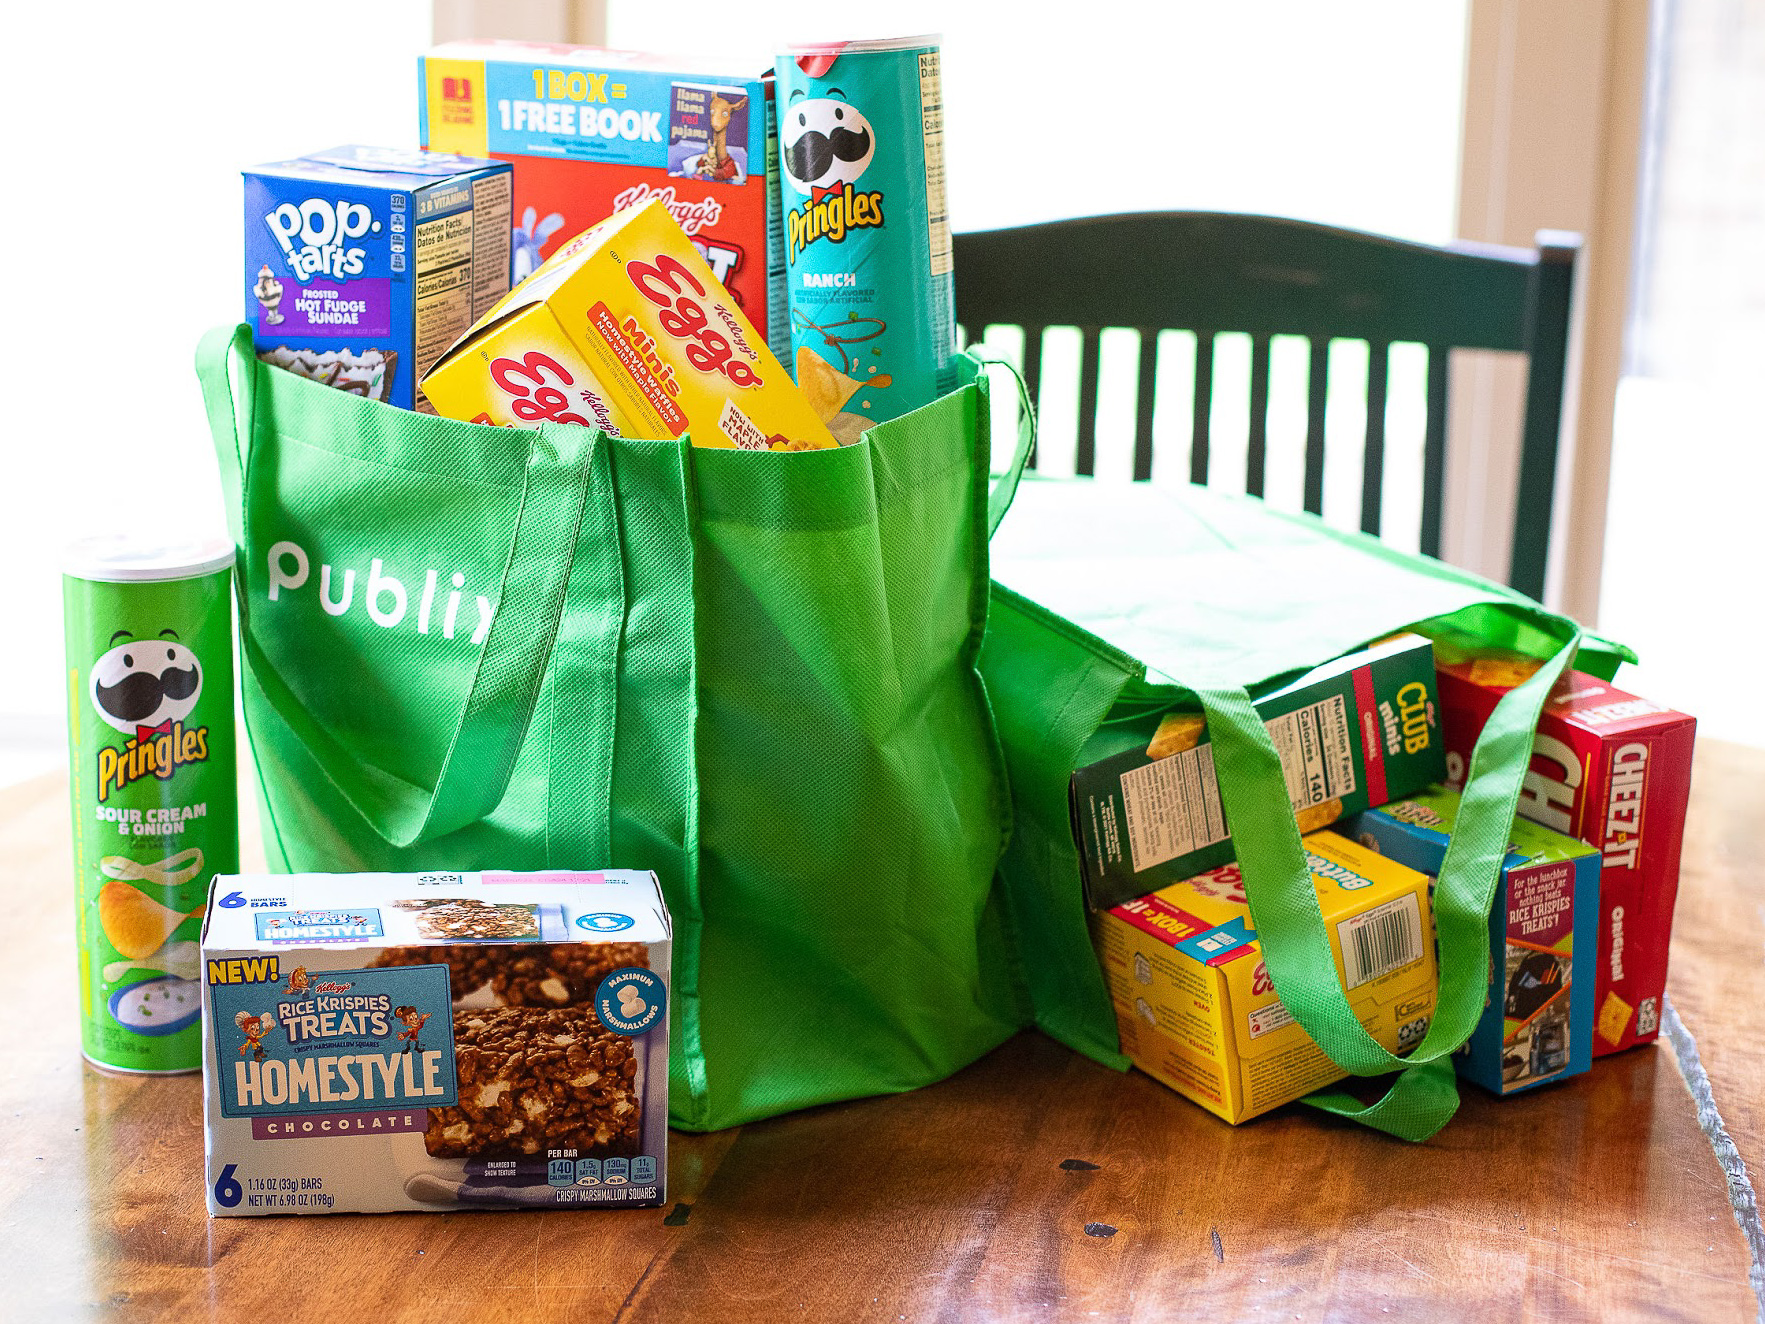 Stock Up On Back To School Favorites From Kellogg's And Save BIG At Publix on I Heart Publix